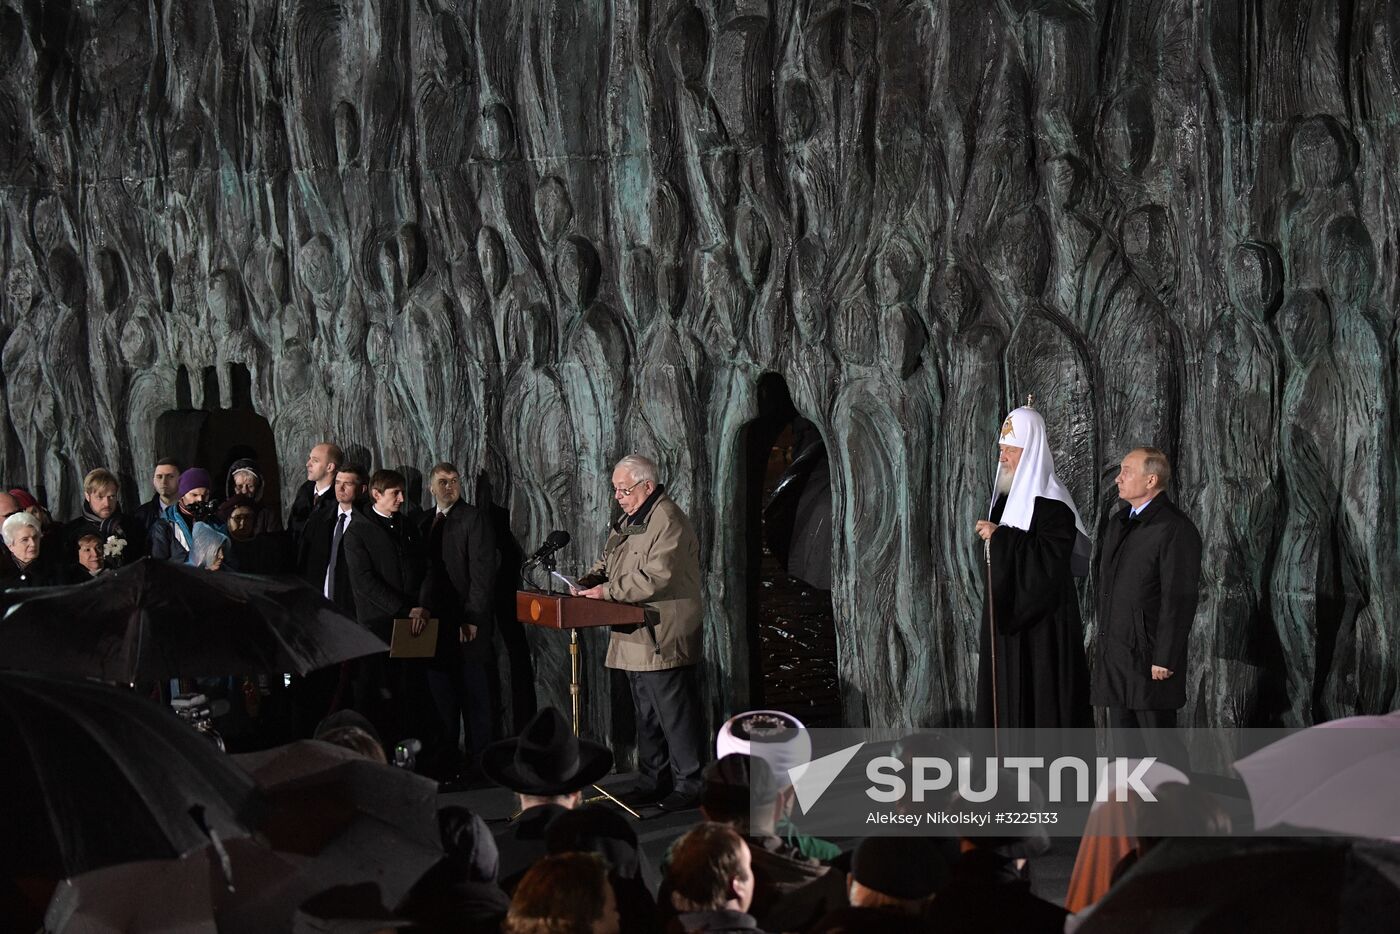 President Vladimir Putin attends unveiling of the Wall of Grief memorial